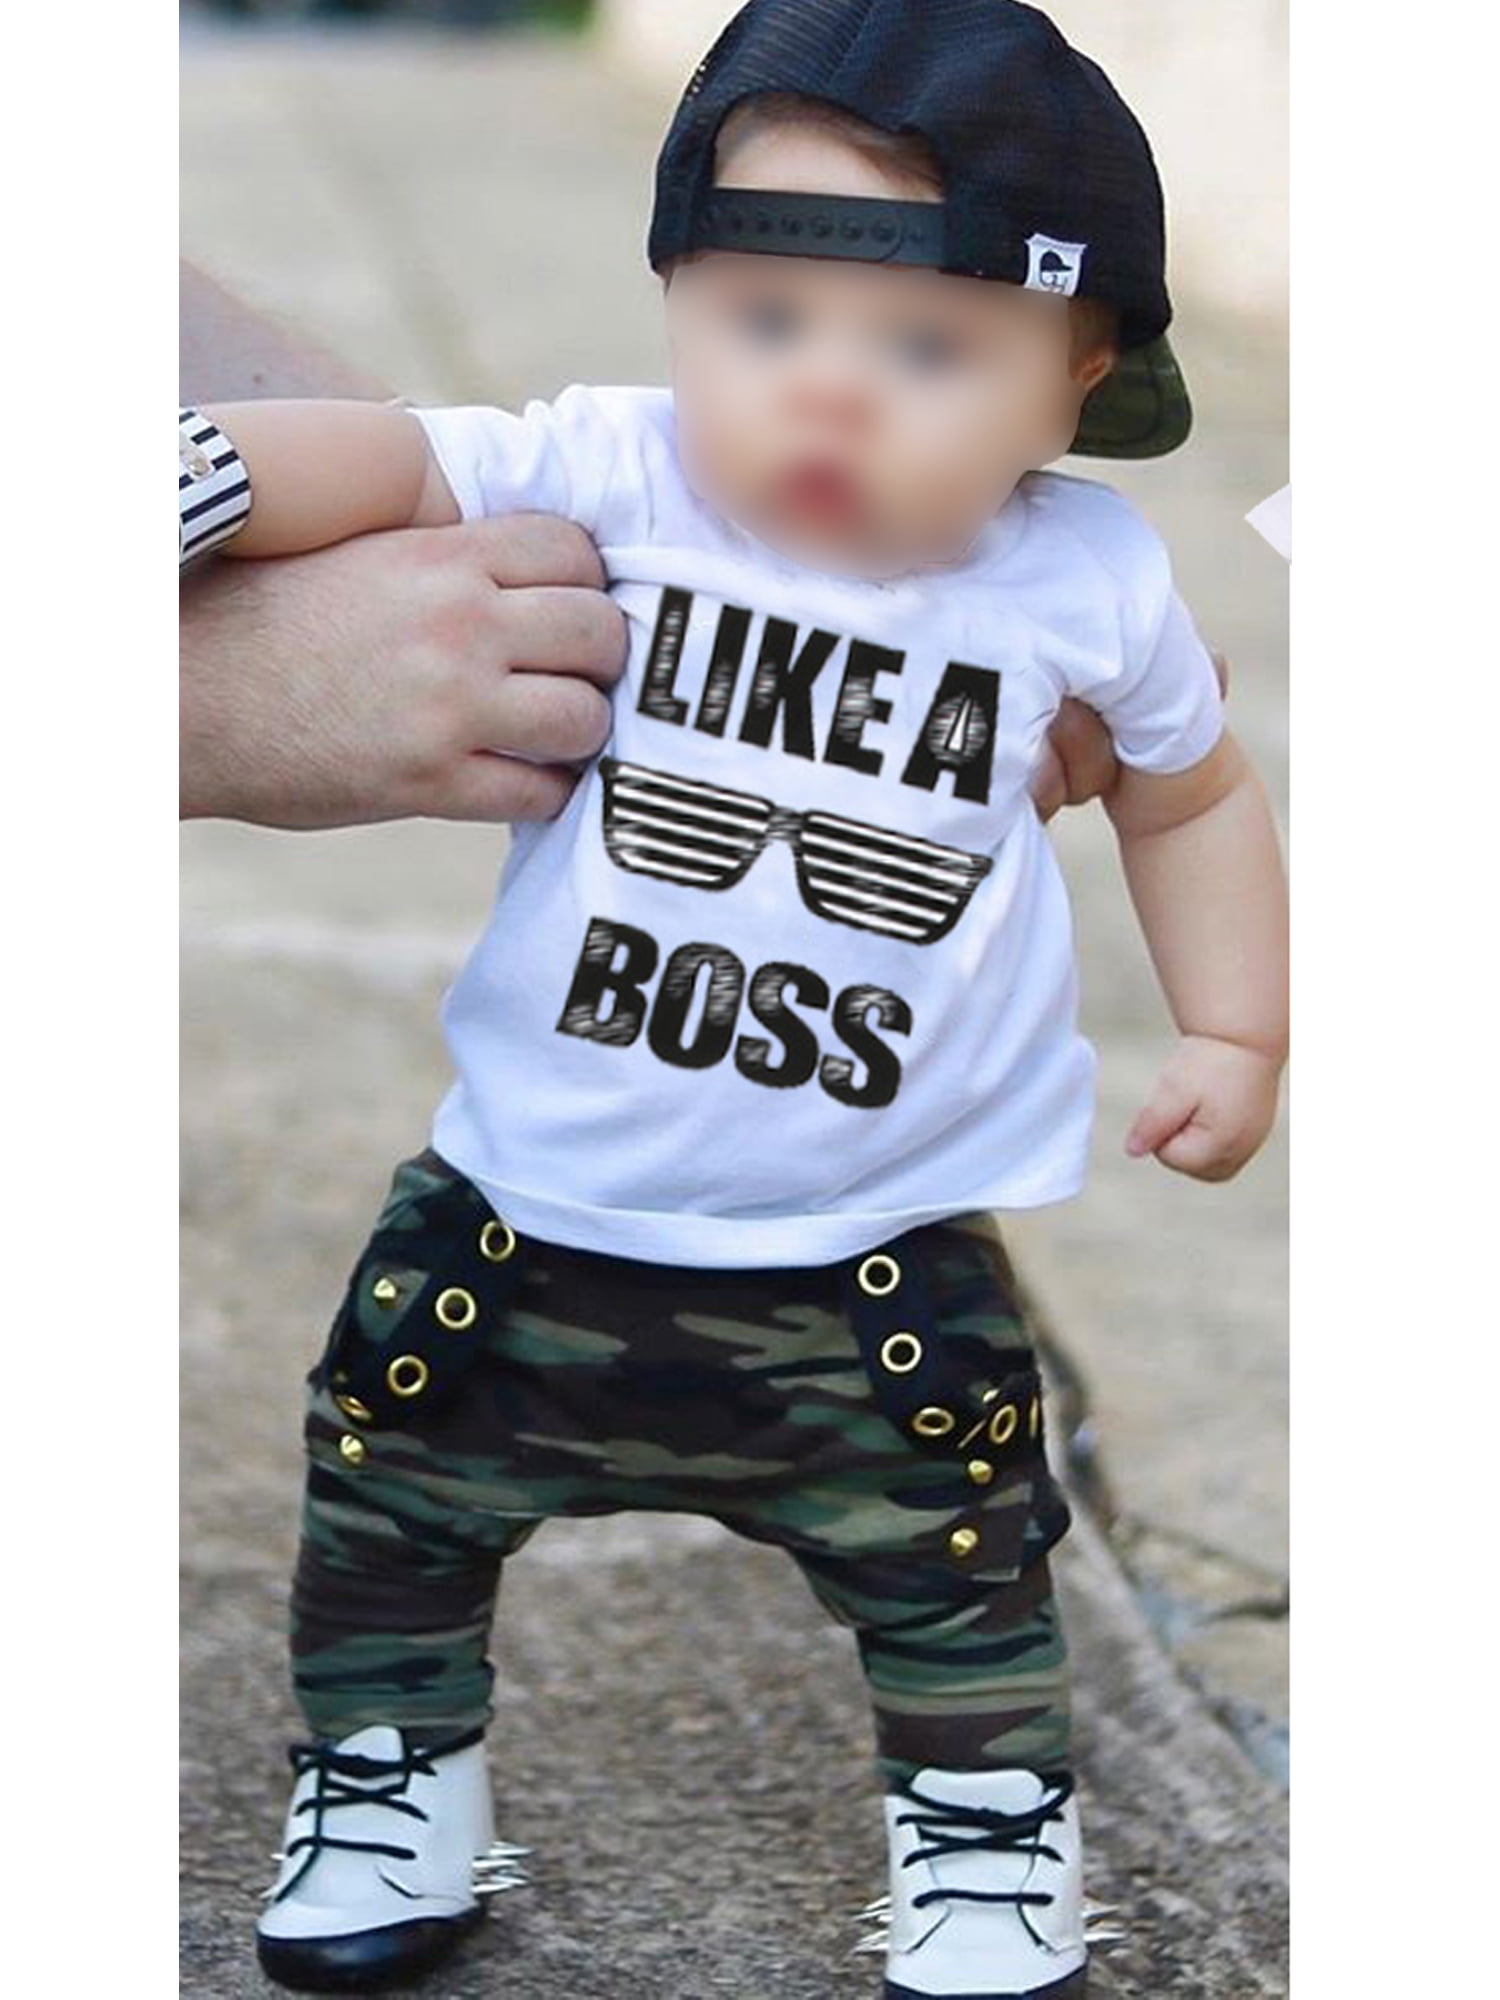 Fashion Kids Baby Boys T-shirt Tops Harem Pants Outfits Set Casual Clothes 1-6Y 